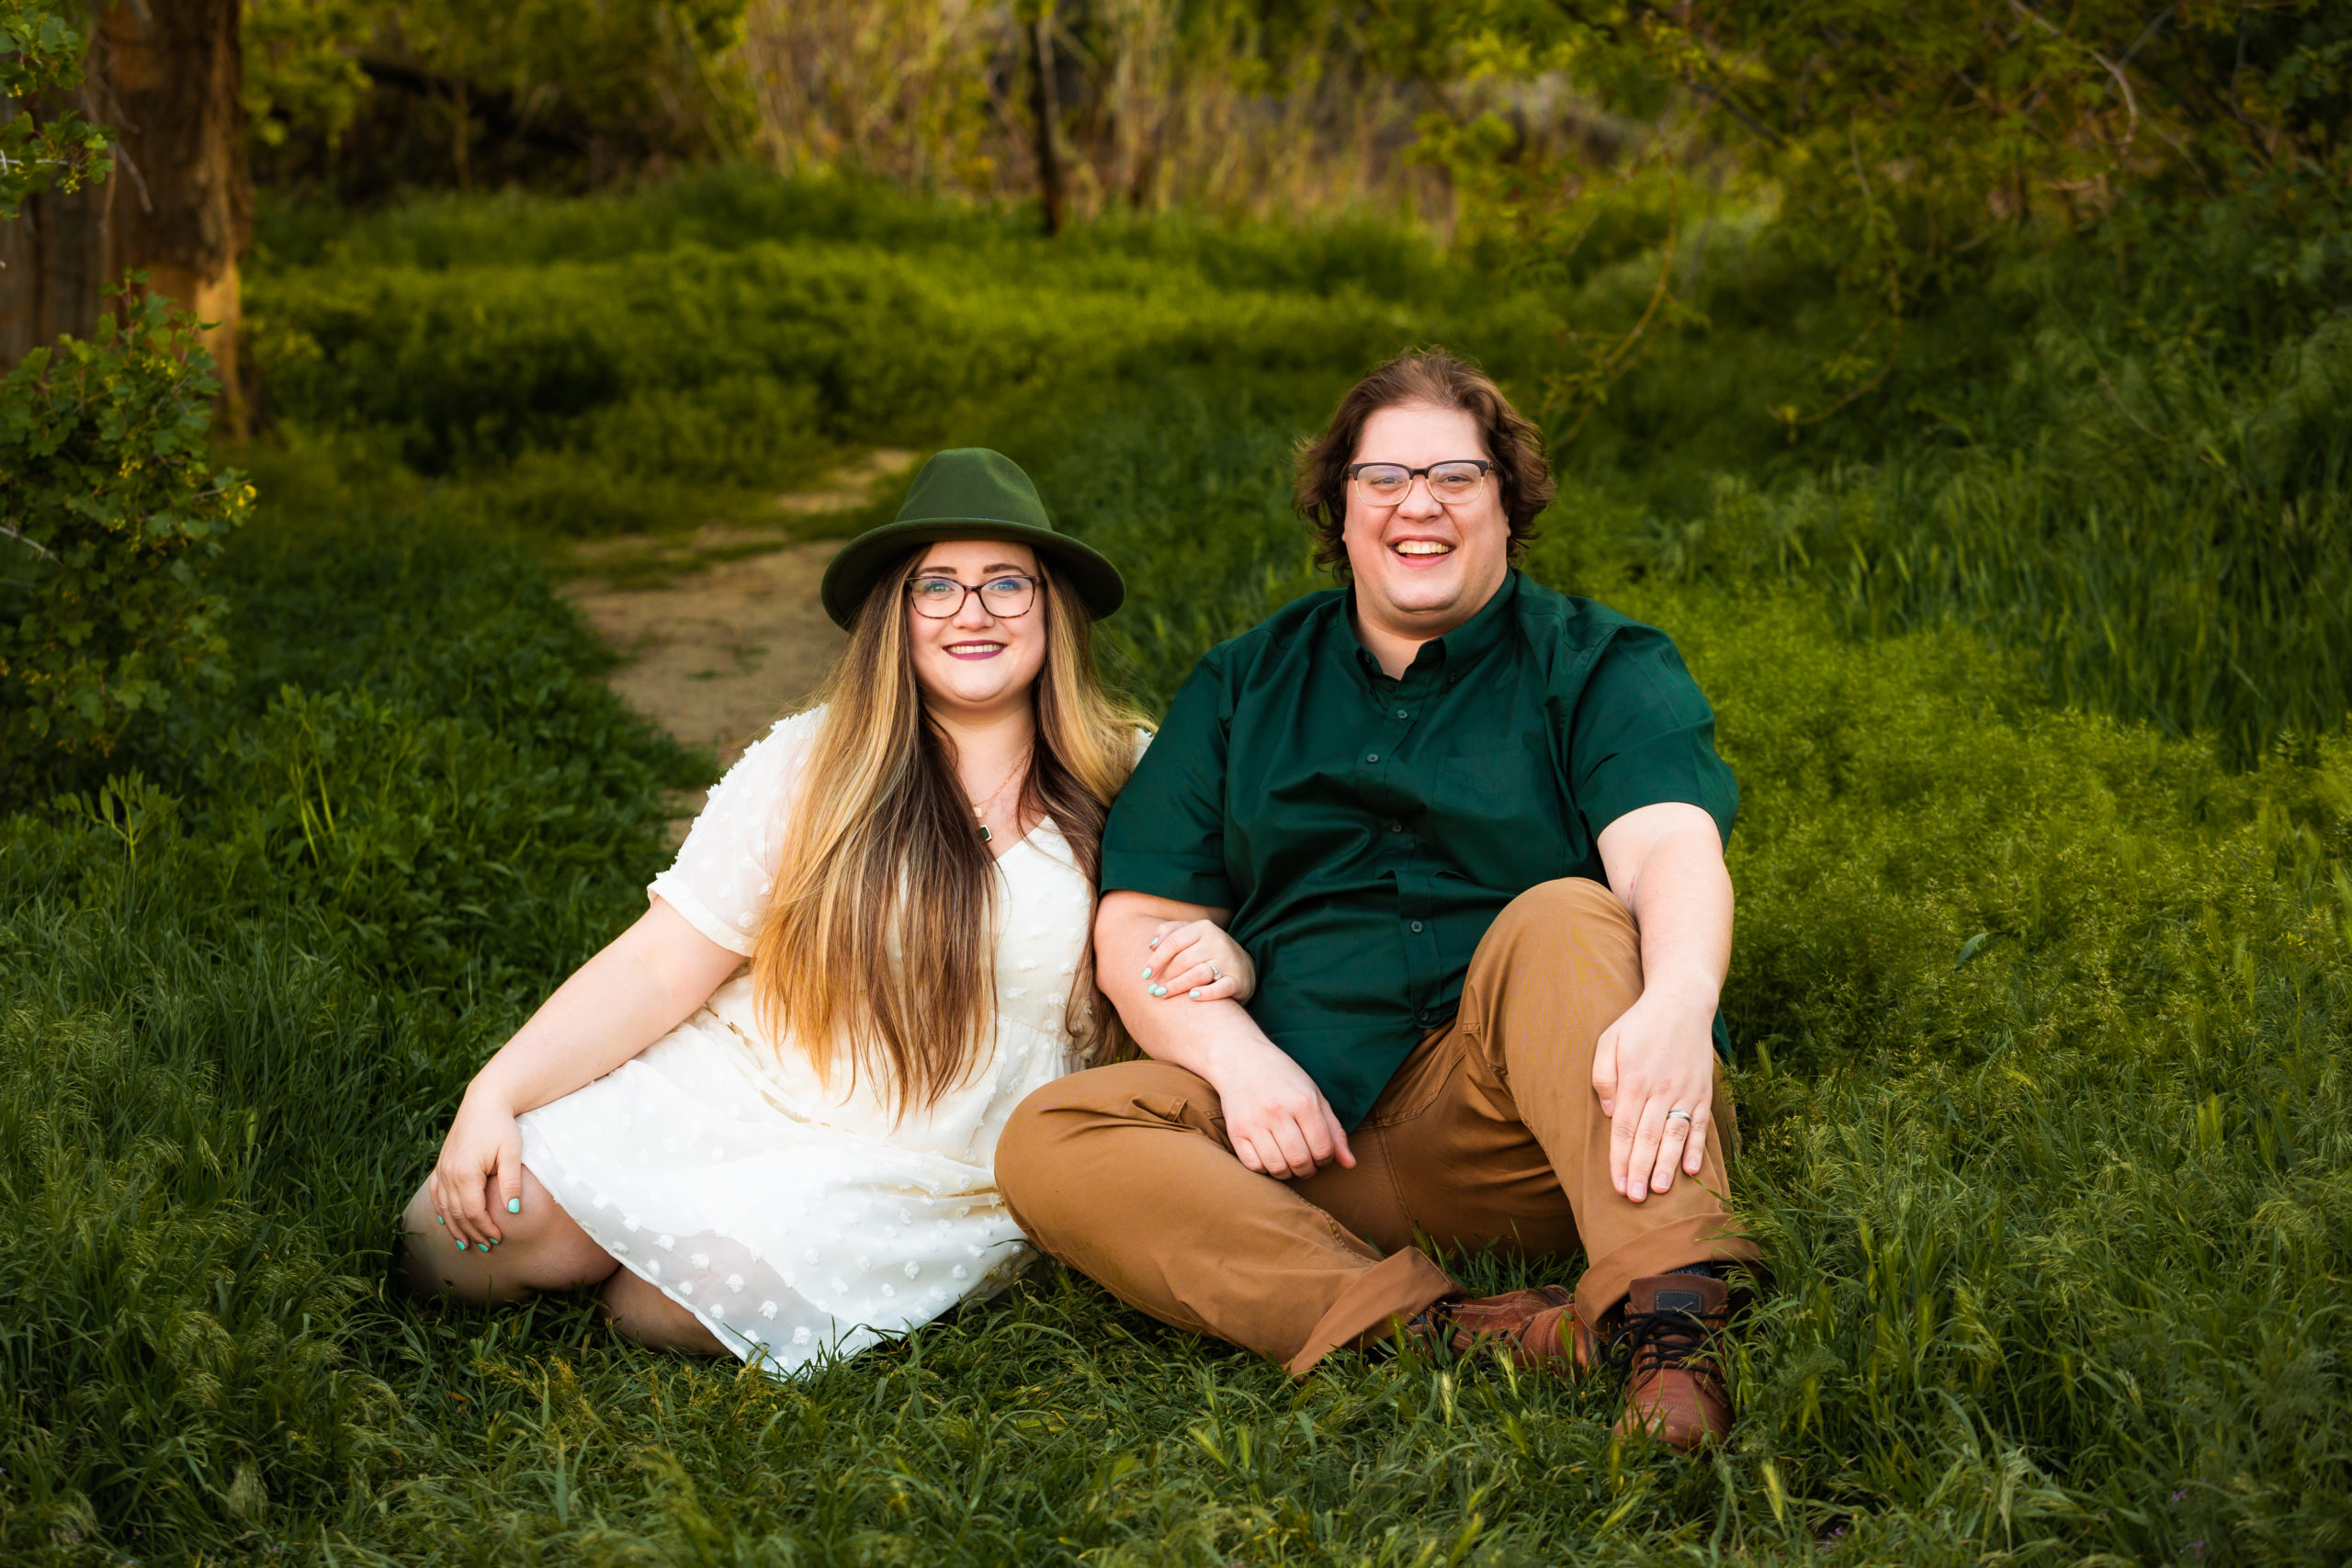 couple sitting on grass laughing together